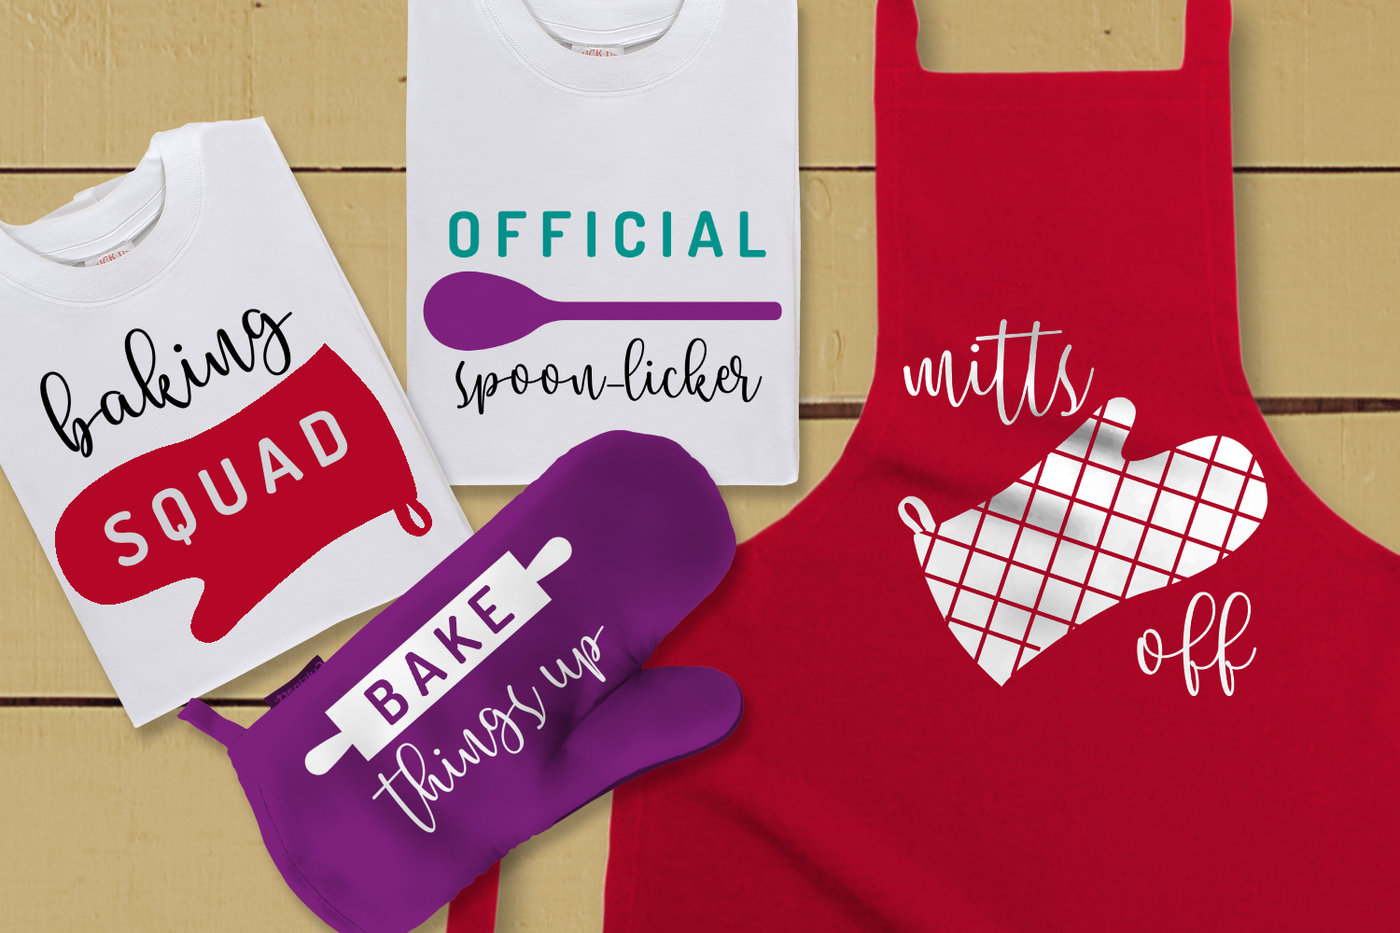 4 baking themed designs: Spoon with "official spoon licker," Oven mitt with "baking squad," Oven mitt with "mitts off," and Rolling pin with "bake things up"